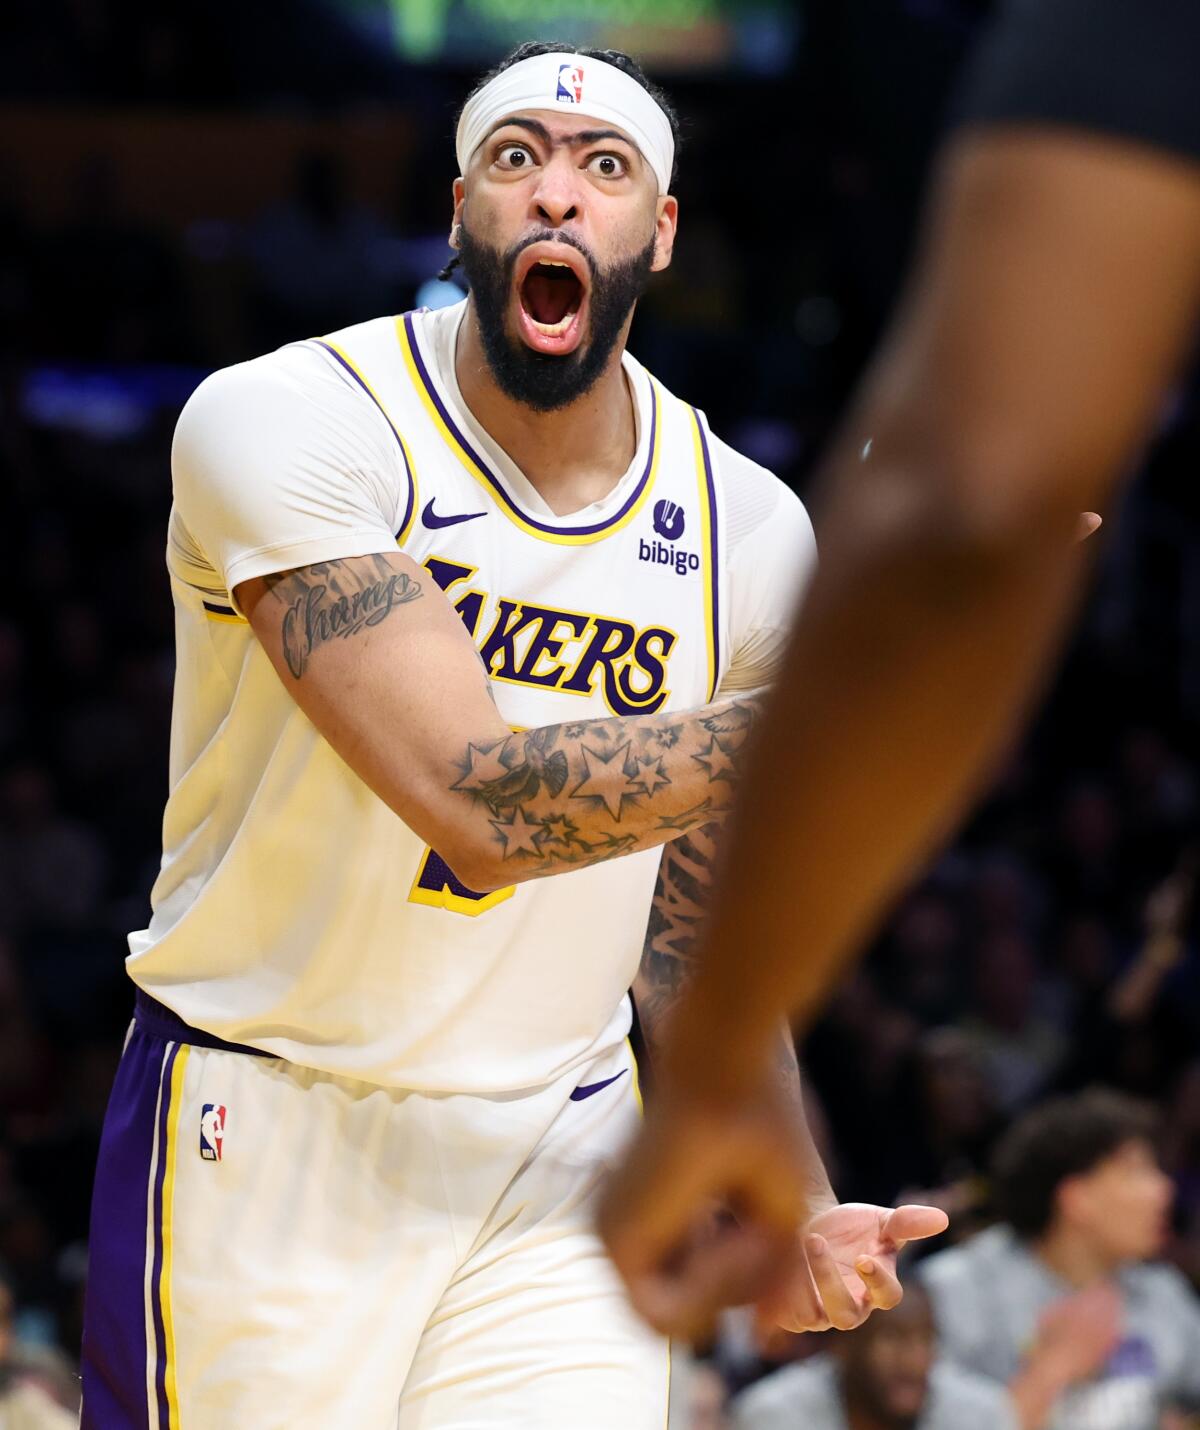 Anthony Davis shouts during a game.